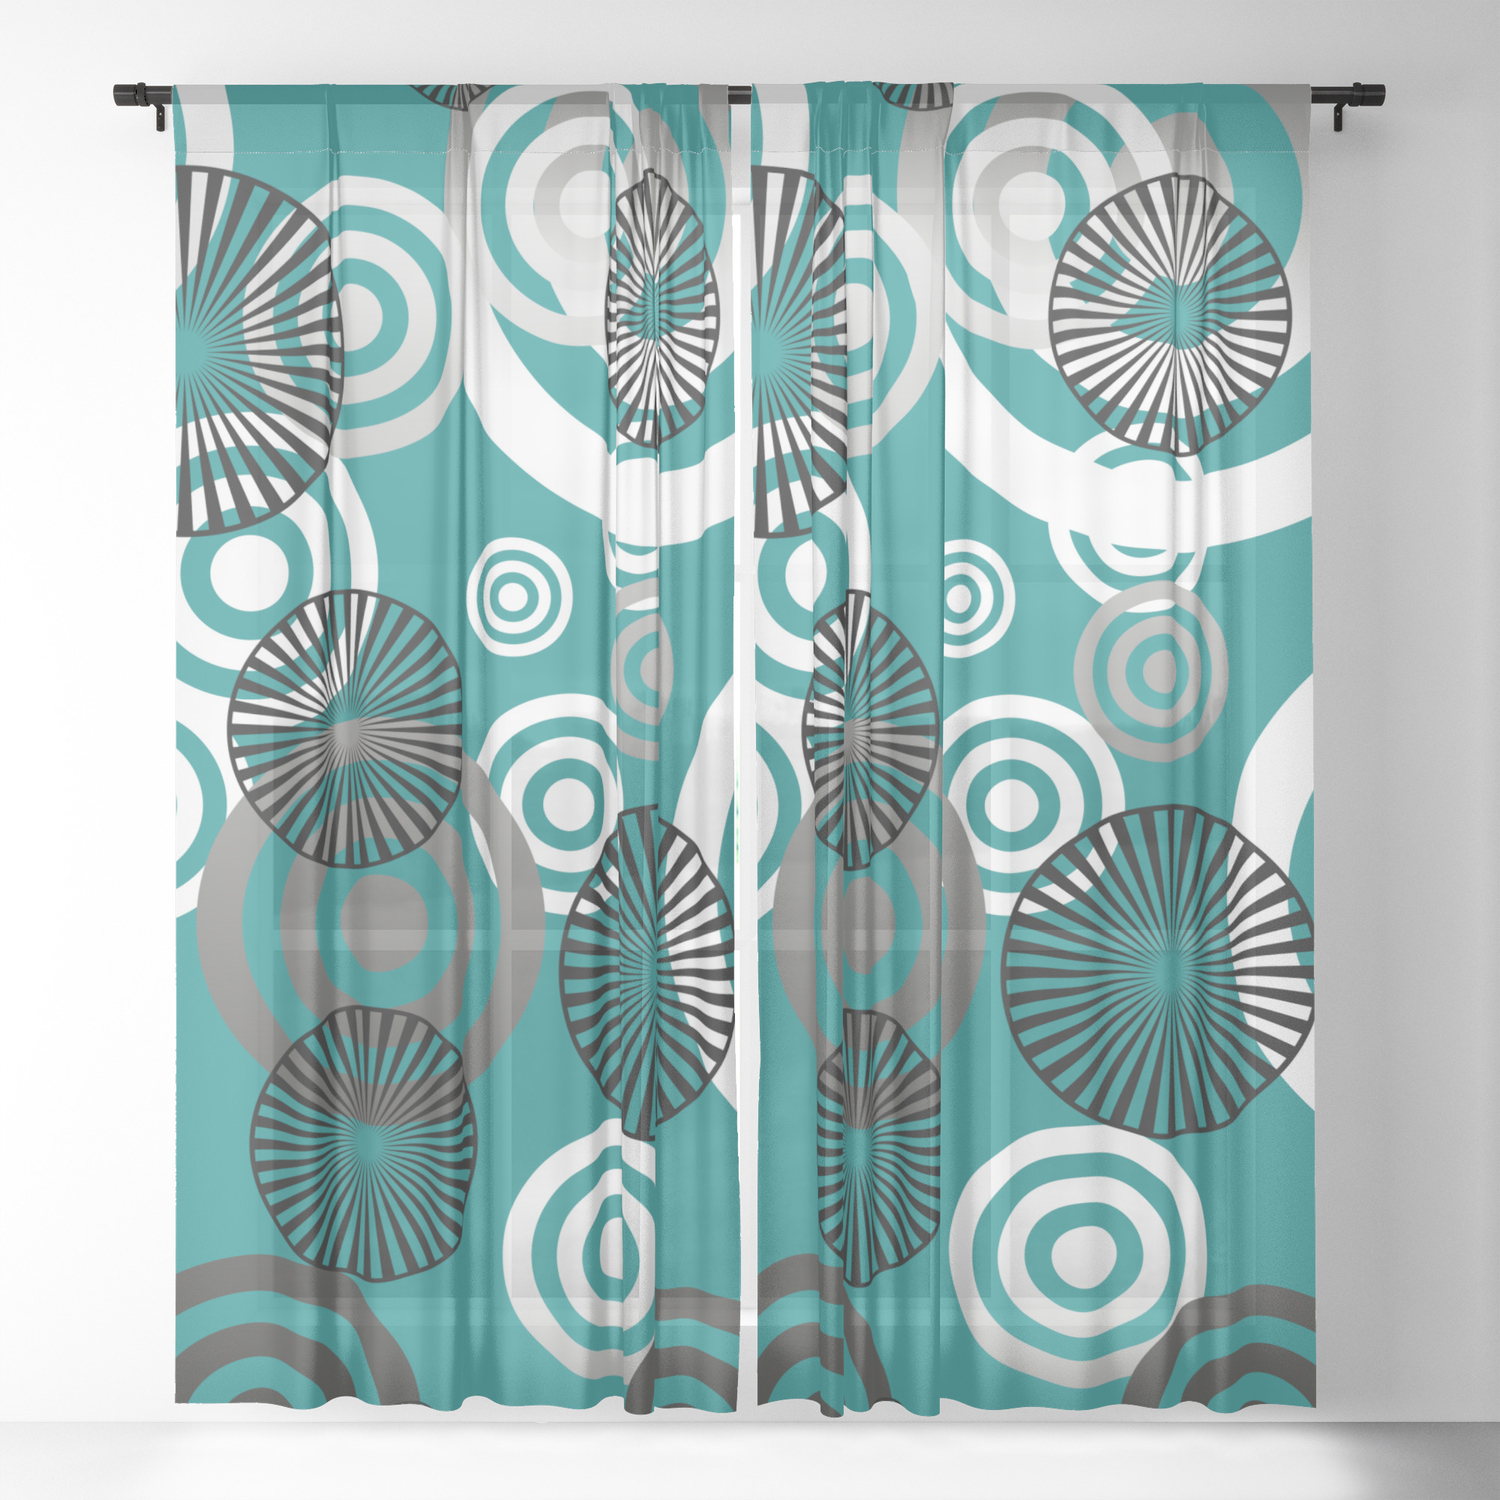 Turquoise Sheer Curtain By Carmenjc, White And Turquoise Curtains